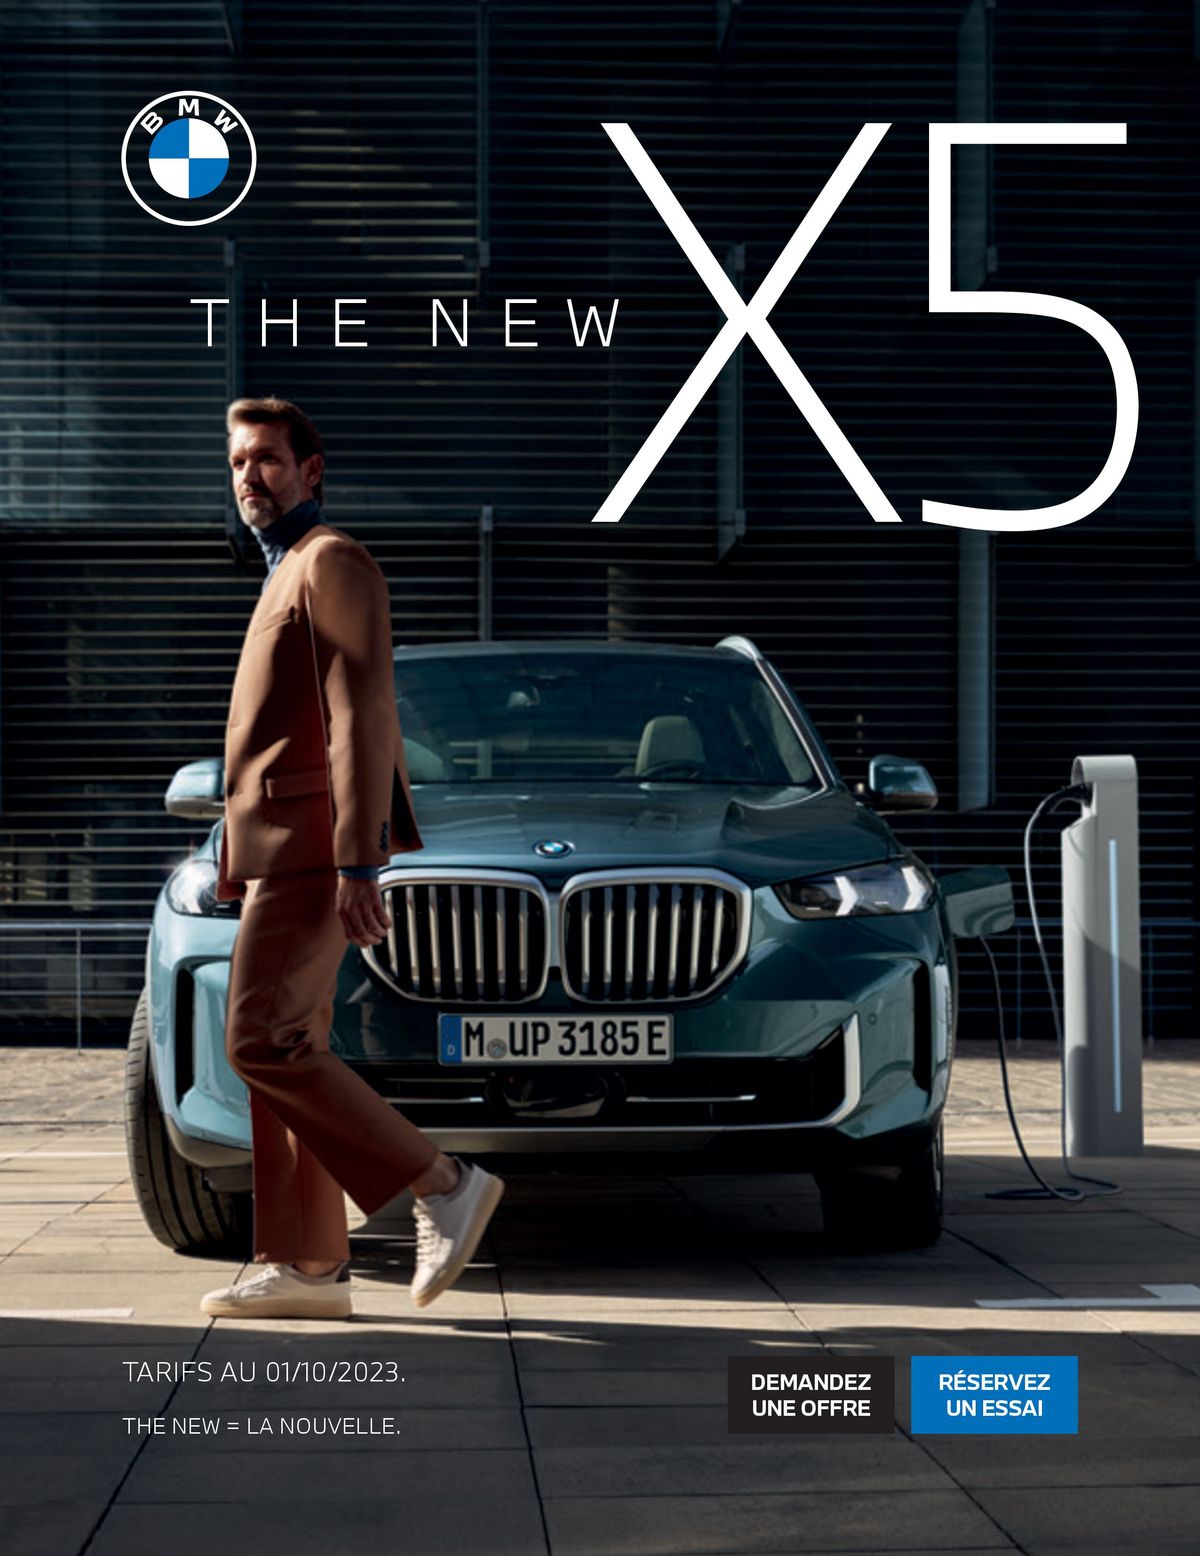 Catalogue The new X5, page 00001